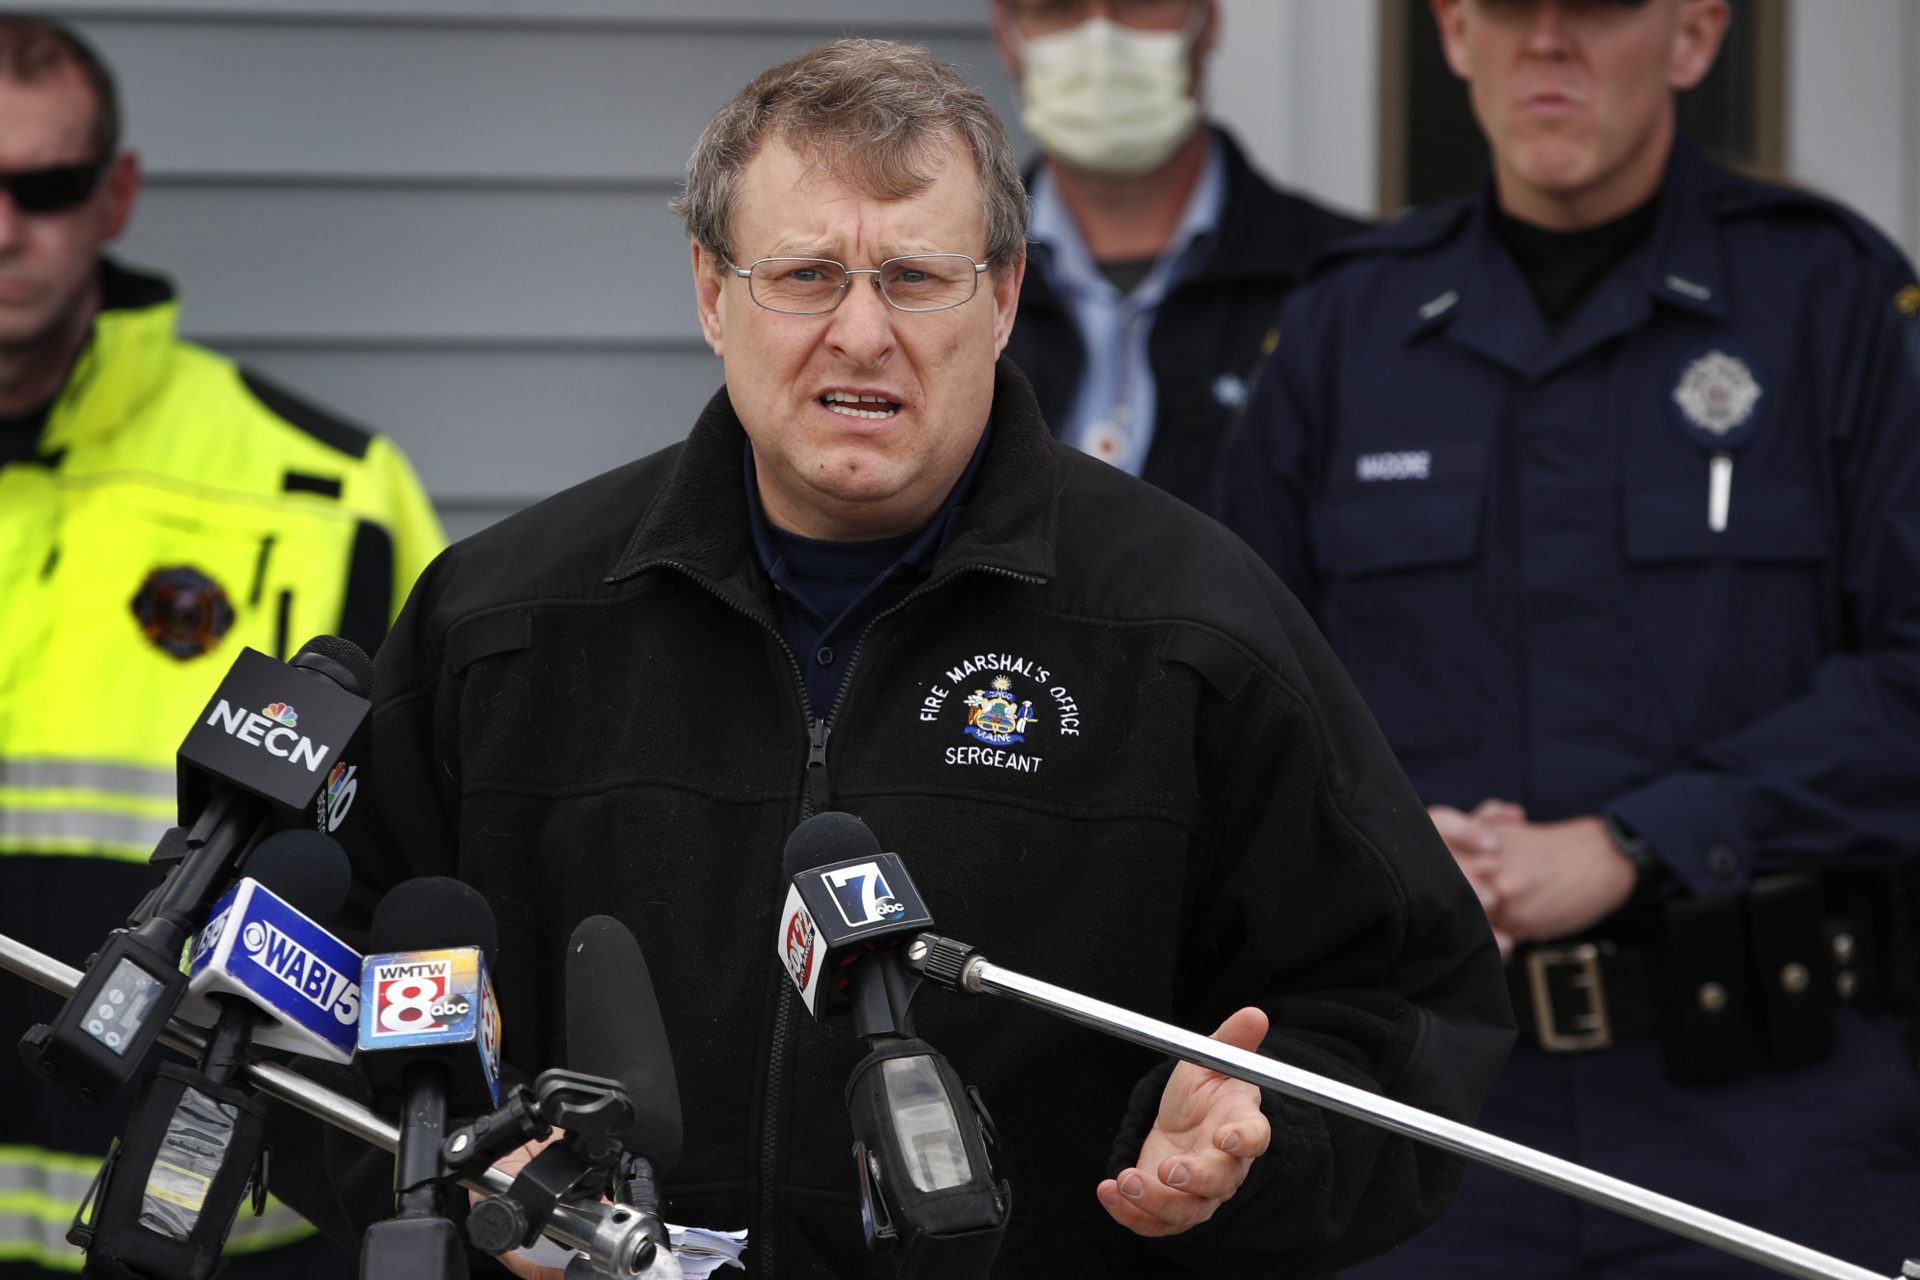 Sgt. Joel Davis of the State Fire Marshal's Office speaks at a news conference following an explosion at the Androscoggin Mill, Wednesday, April 15, 2020, in Jay, Maine. There were no injuries in the massive explosion that sent debris hundreds of feet into the air.